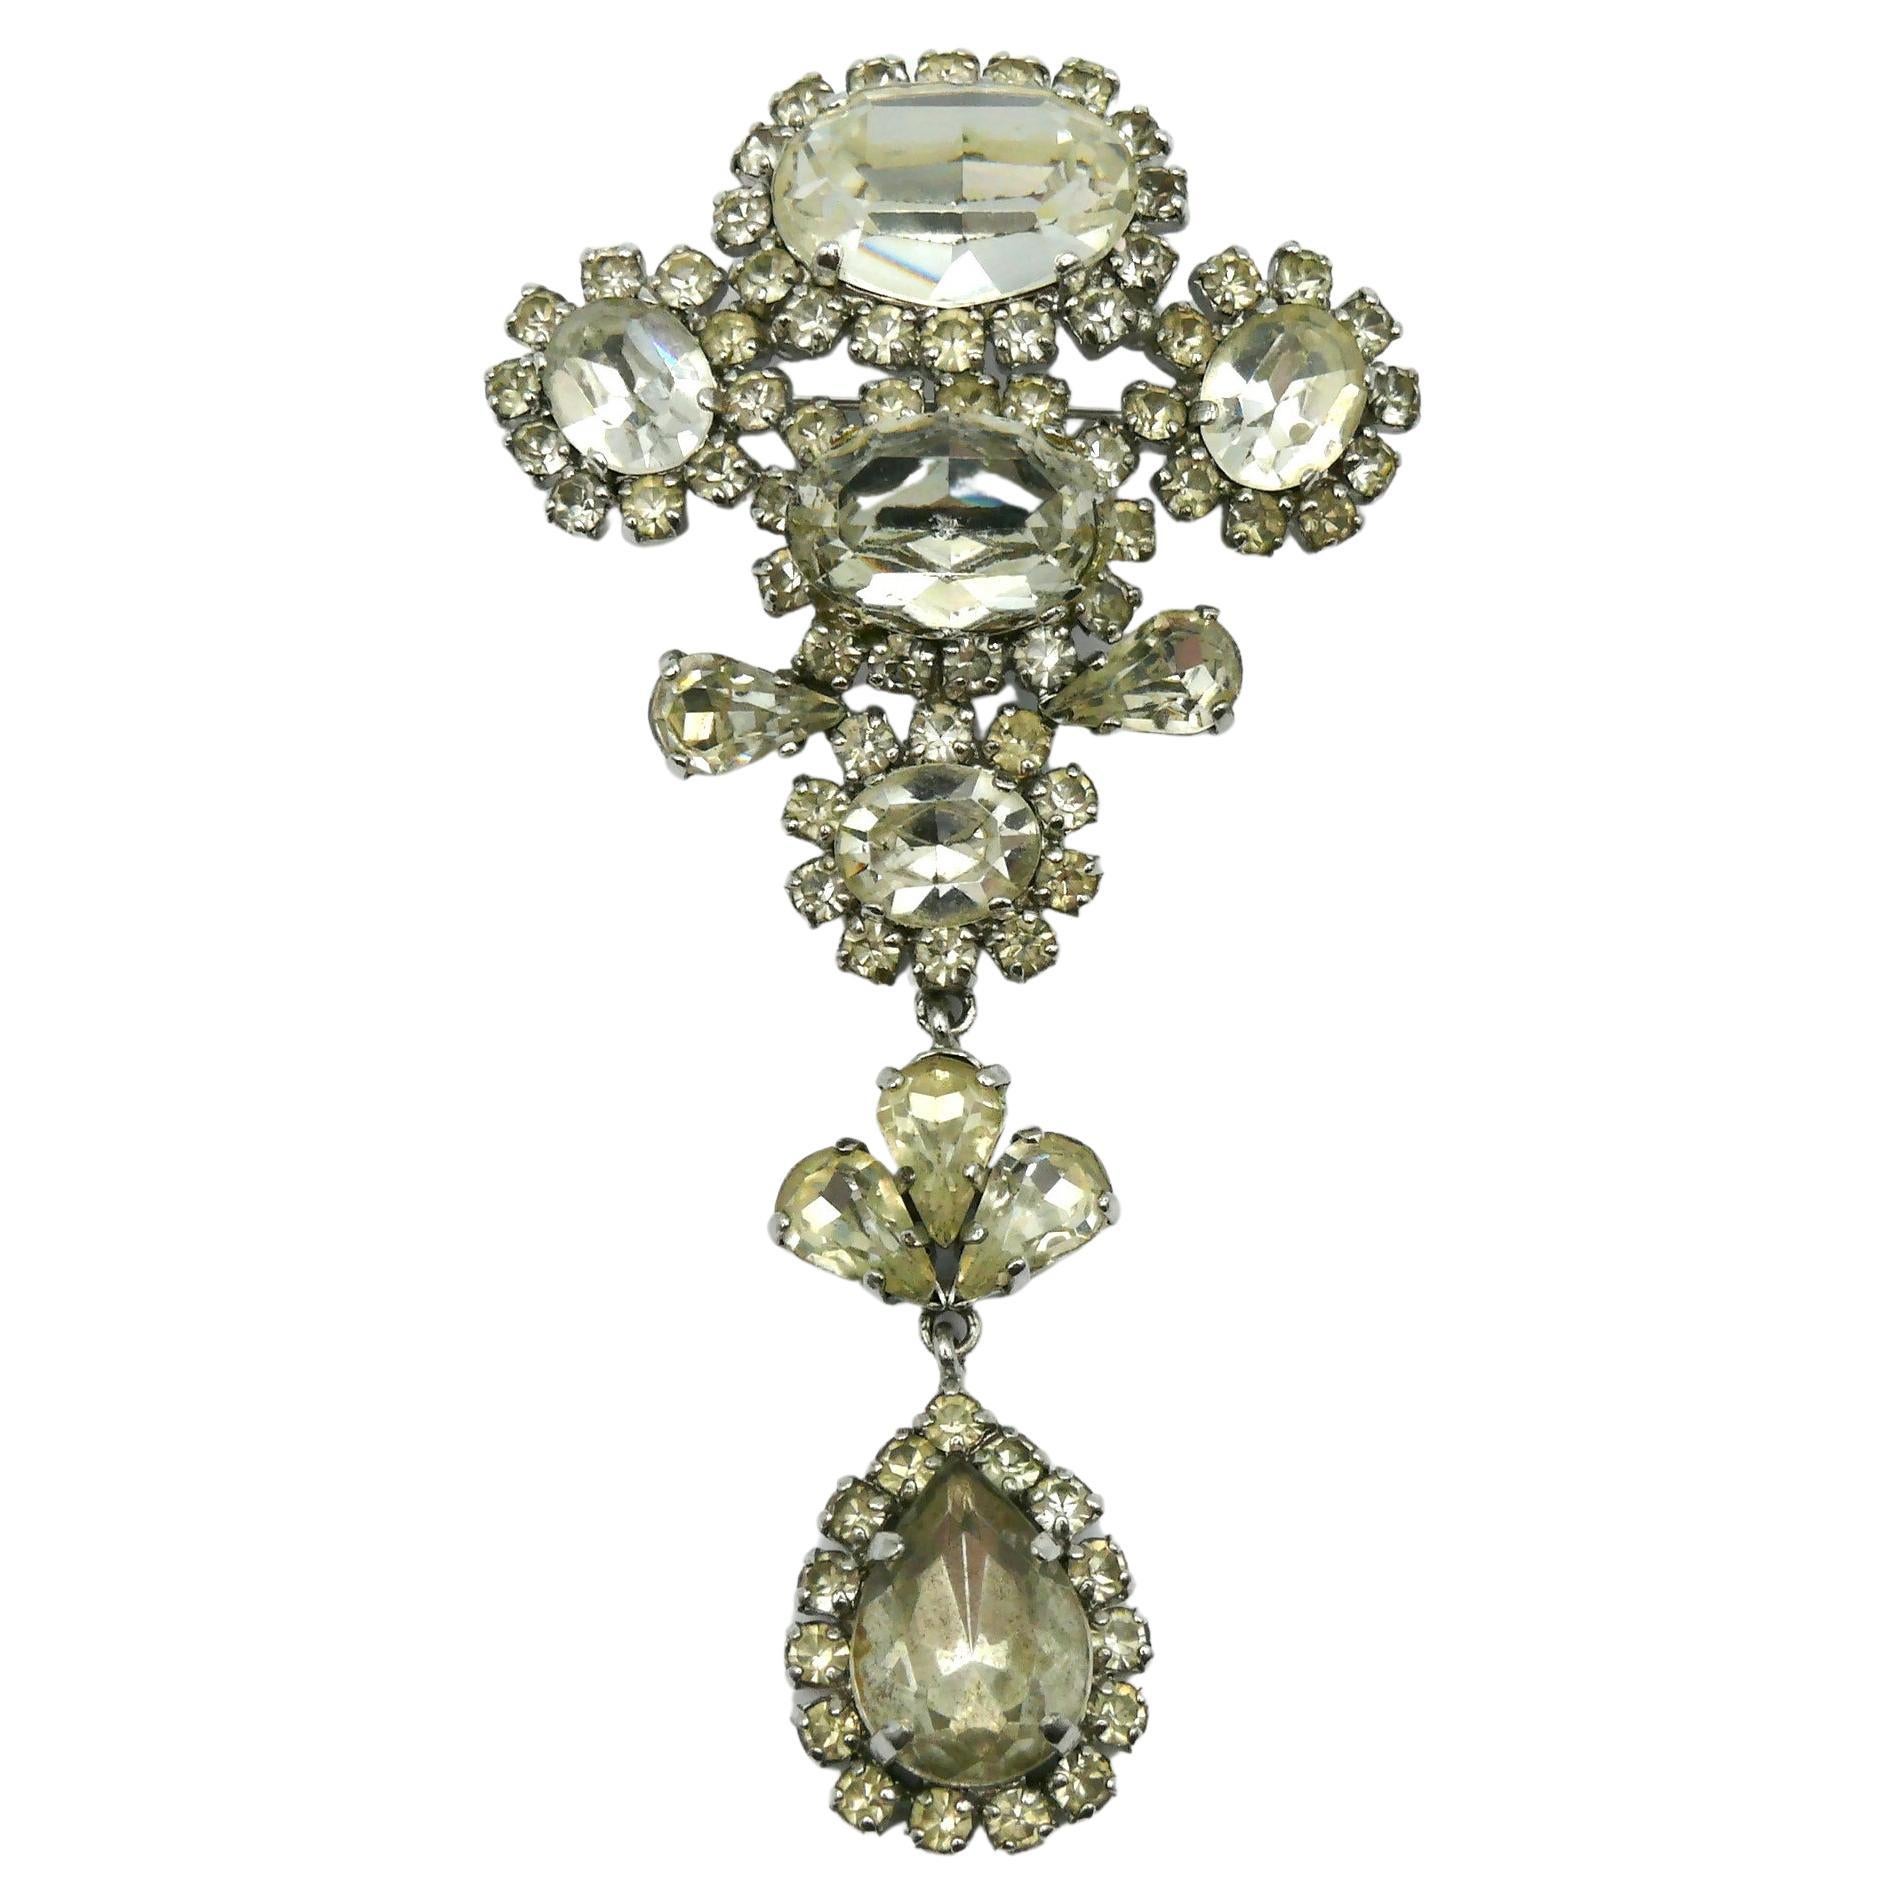 CHRISTIAN DIOR Vintage Jewelled Silver Tone Dangling Brooch